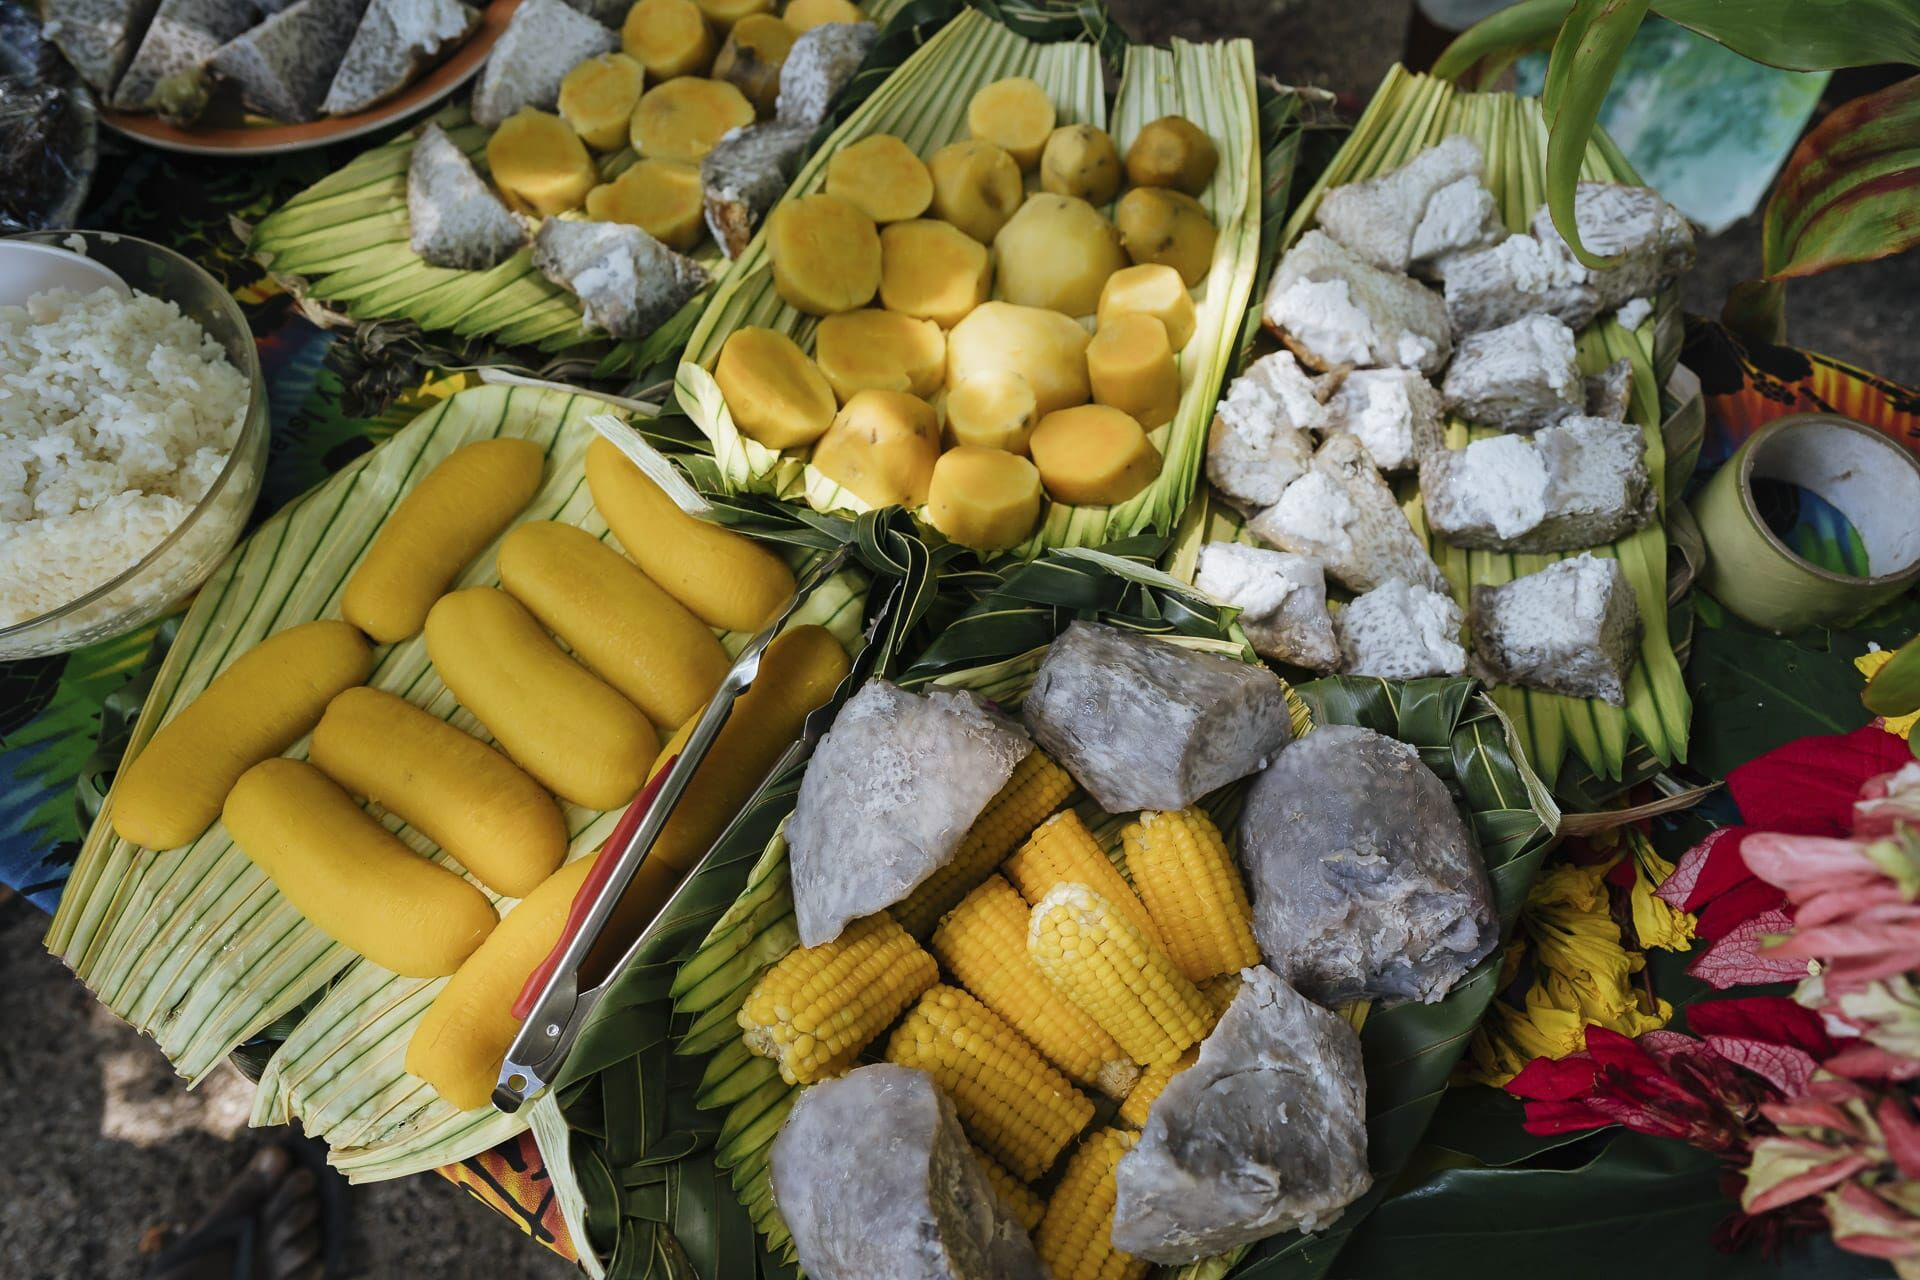 Agricultural food products from Vanuatu